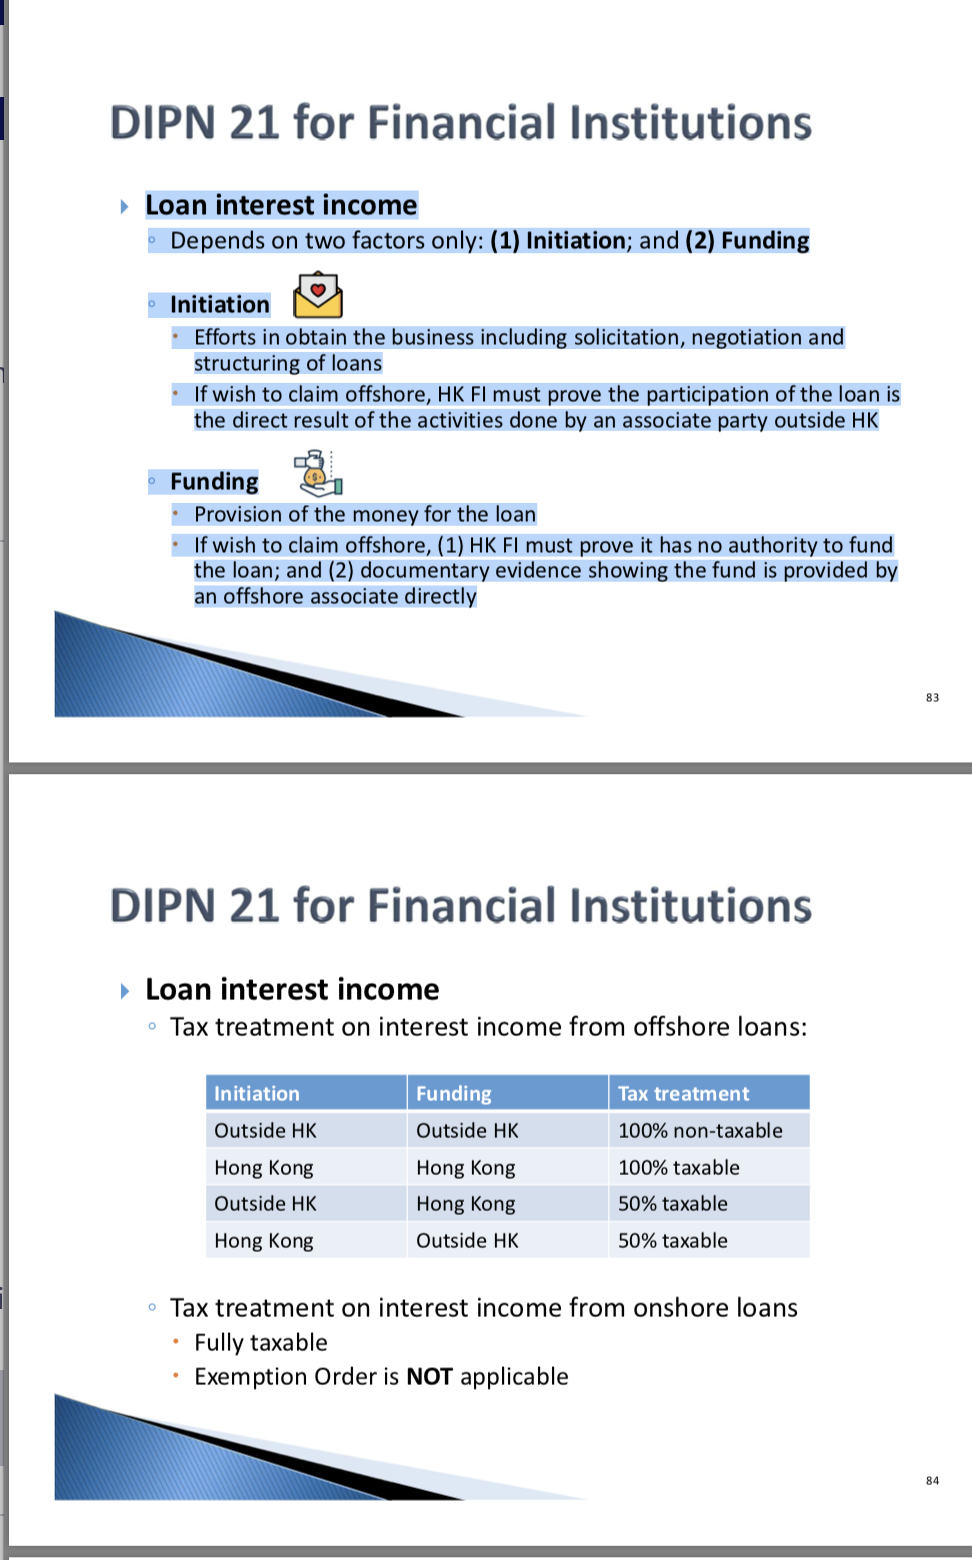 DIPN 21 for Financial Institutions
▸ Loan interest income
Depends on two factors only: (1) Initiation; and (2) Funding
Initiation
Efforts in obtain the business including solicitation, negotiation and
structuring of loans
⚫ If wish to claim offshore, HK FI must prove the participation of the loan is
the direct result of the activities done by an associate party outside HK
Funding
Provision of the money for the loan
If wish to claim offshore, (1) HK FI must prove it has no authority to fund
the loan; and (2) documentary evidence showing the fund is provided by
an offshore associate directly
DIPN 21 for Financial Institutions
▸ Loan interest income
。 Tax treatment on interest income from offshore loans:
Initiation
Outside HK
Funding
Outside HK
Hong Kong
Hong Kong
Tax treatment
100% non-taxable
100% taxable
Outside HK
Hong Kong
50% taxable
Hong Kong
Outside HK
50% taxable
。 Tax treatment on interest income from onshore loans
Fully taxable
Exemption Order is NOT applicable
83
84